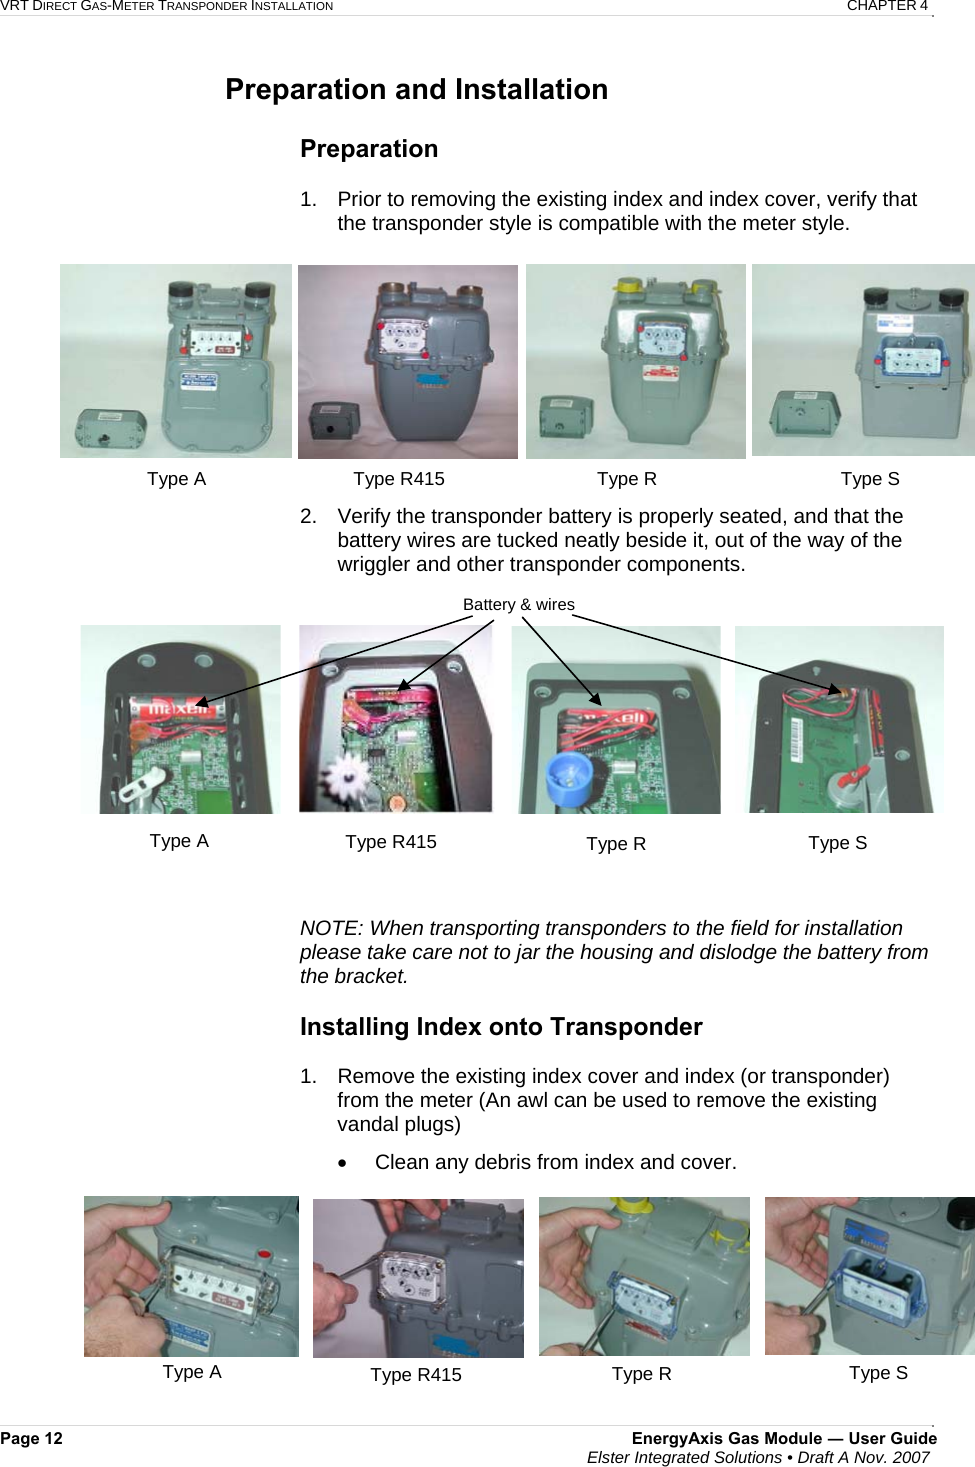 VRT DIRECT GAS-METER TRANSPONDER INSTALLATION   CHAPTER 4 Page 12  EnergyAxis Gas Module ― User Guide  Elster Integrated Solutions • Draft A Nov. 2007  Preparation and Installation   Preparation  1.  Prior to removing the existing index and index cover, verify that the transponder style is compatible with the meter style.  2.  Verify the transponder battery is properly seated, and that the battery wires are tucked neatly beside it, out of the way of the wriggler and other transponder components.                               NOTE: When transporting transponders to the field for installation please take care not to jar the housing and dislodge the battery from the bracket.  Installing Index onto Transponder  1.  Remove the existing index cover and index (or transponder) from the meter (An awl can be used to remove the existing vandal plugs) •  Clean any debris from index and cover.      Battery &amp; wiresType R415  Type R  Type S Type A Type A  Type R415  Type S Type R Type A  Type S Type R Type R415 